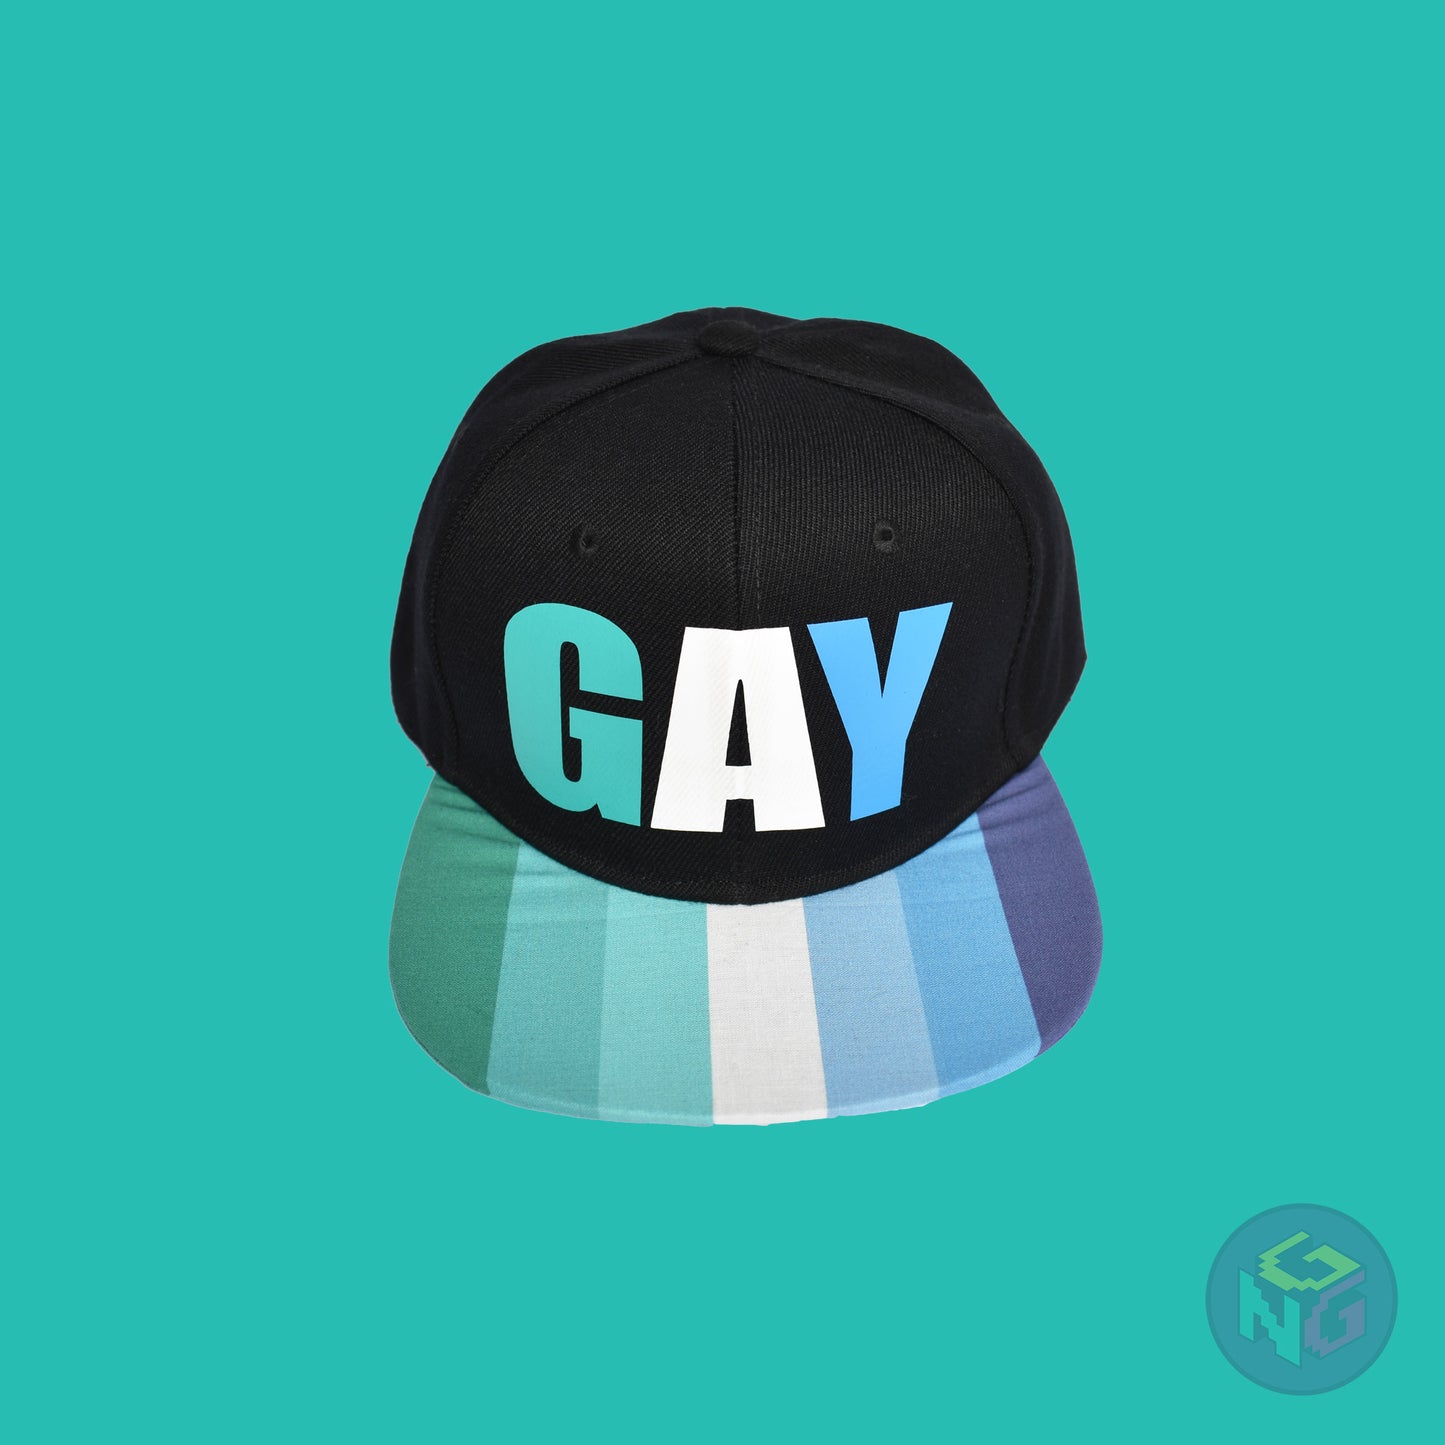 Black flat bill snapback hat. The brim has the gay pride flag on both sides and the front of the hat has the word “GAY” in turquoises, blues, and white. Front top view